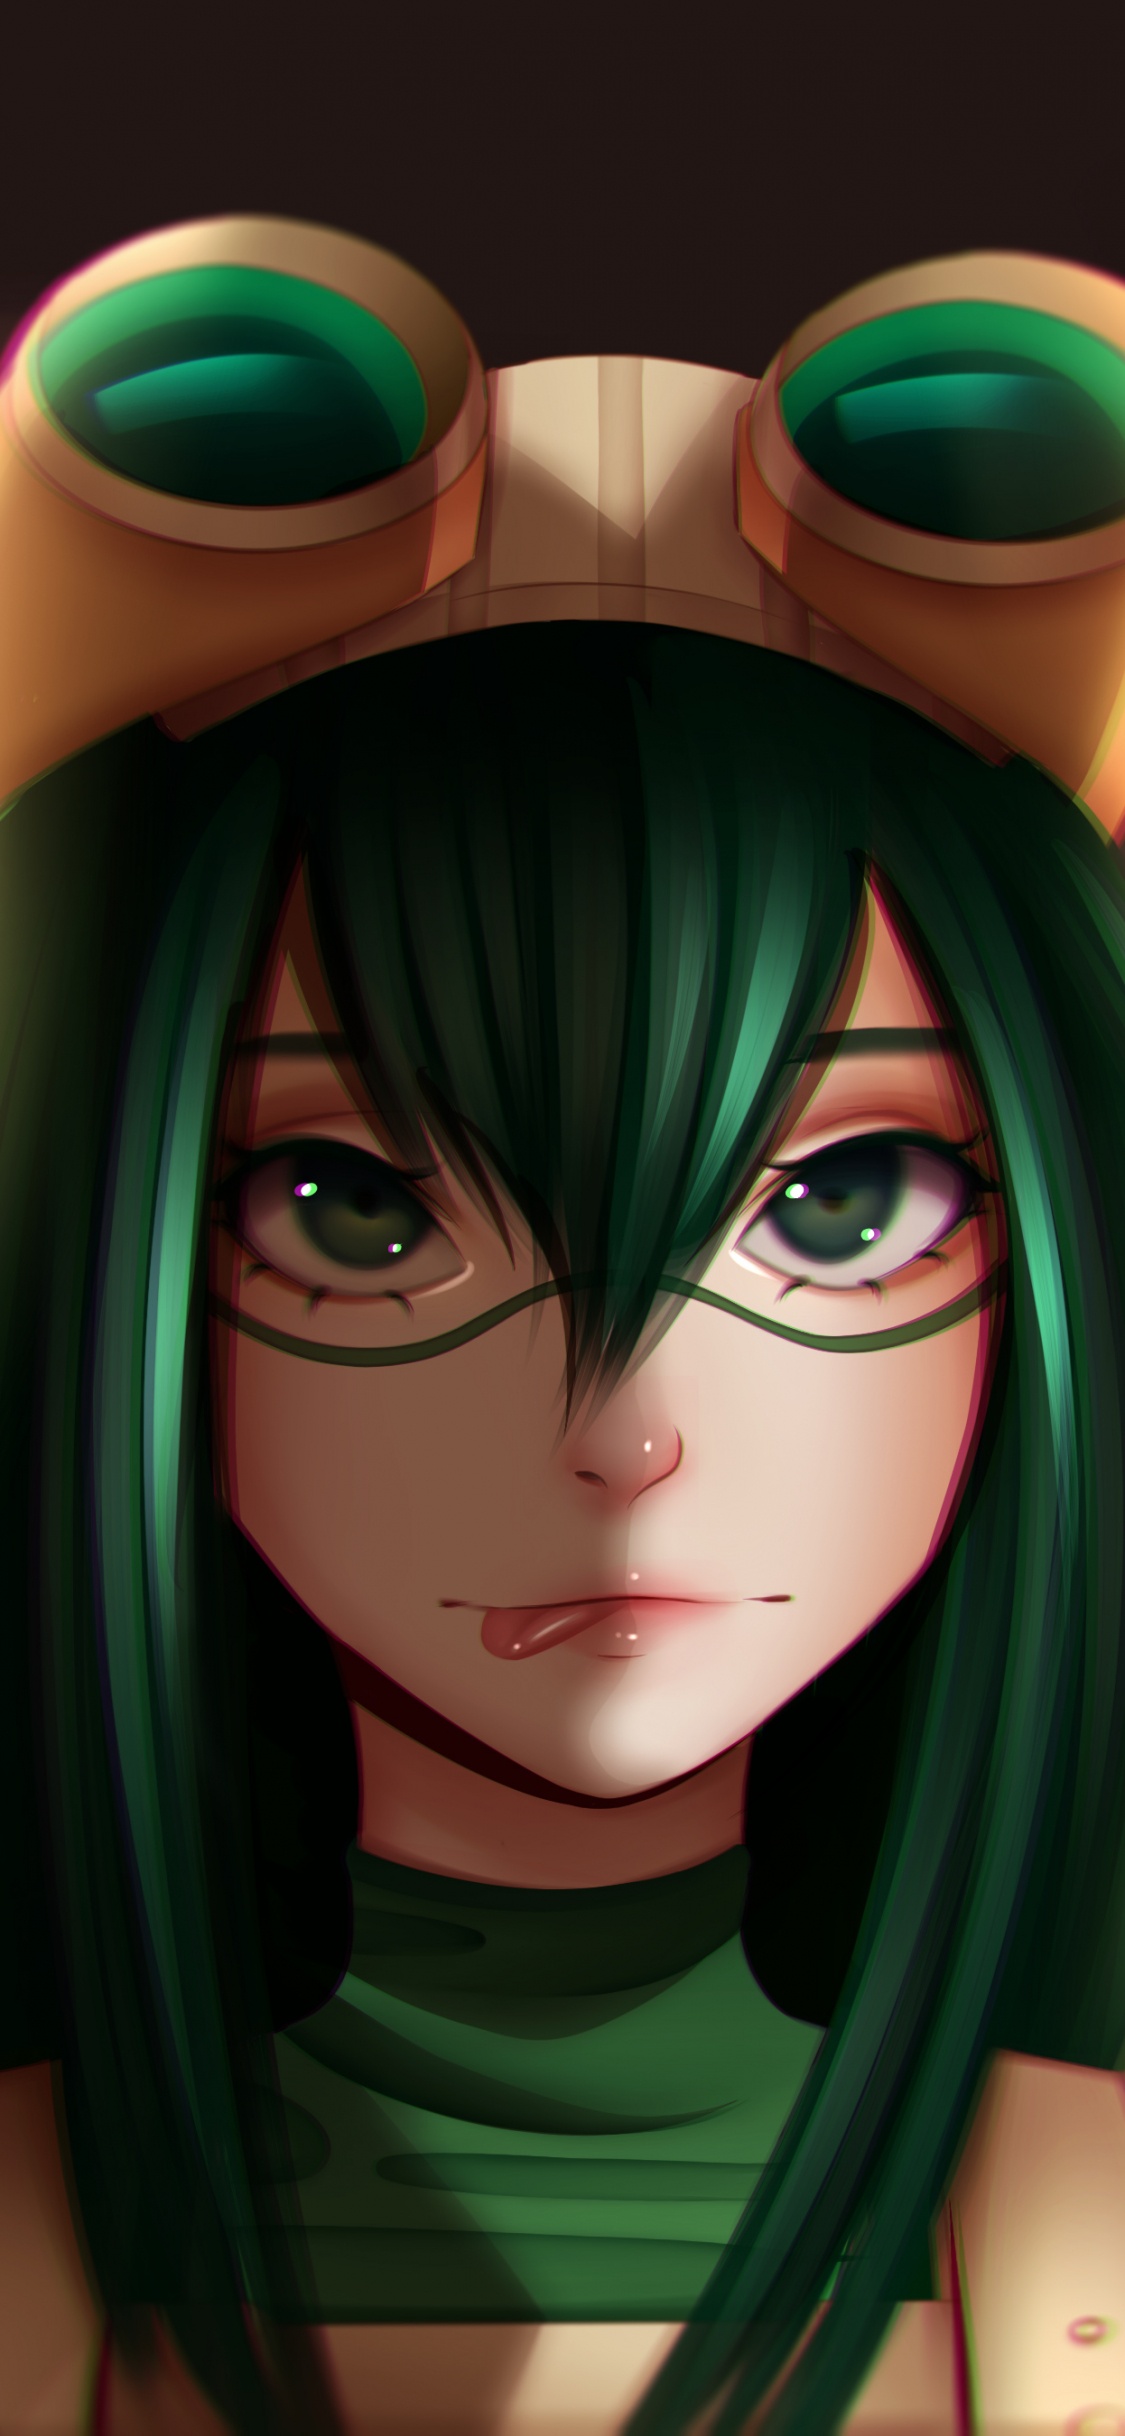 Personnage D'anime Féminin Aux Cheveux Verts. Wallpaper in 1125x2436 Resolution